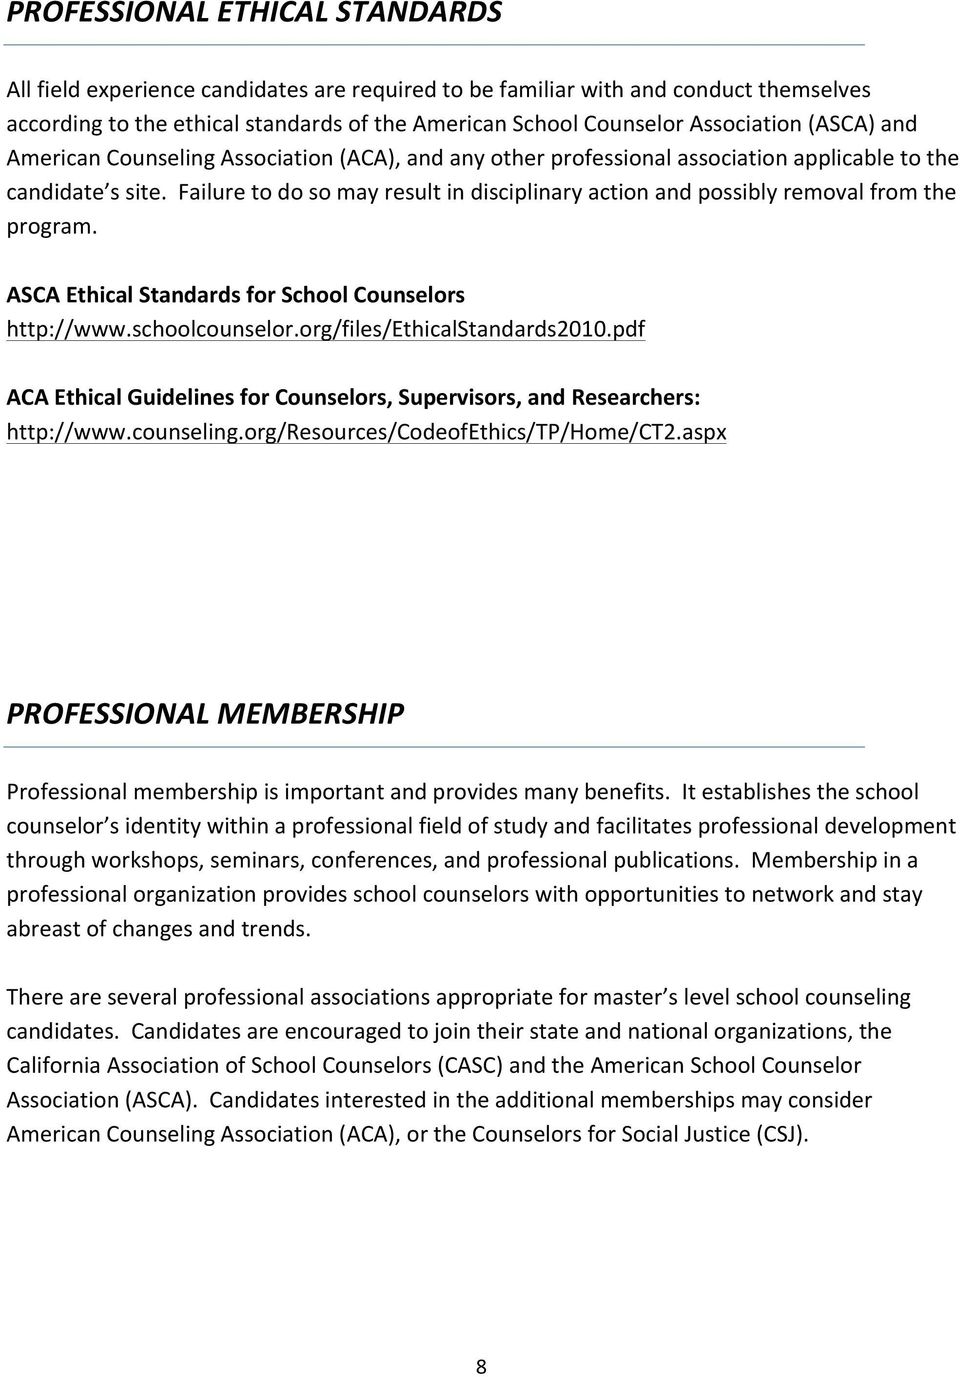 Failure to do so may result in disciplinary action and possibly removal from the program. ASCA Ethical Standards for School Counselors http://www.schoolcounselor.org/files/ethicalstandards2010.